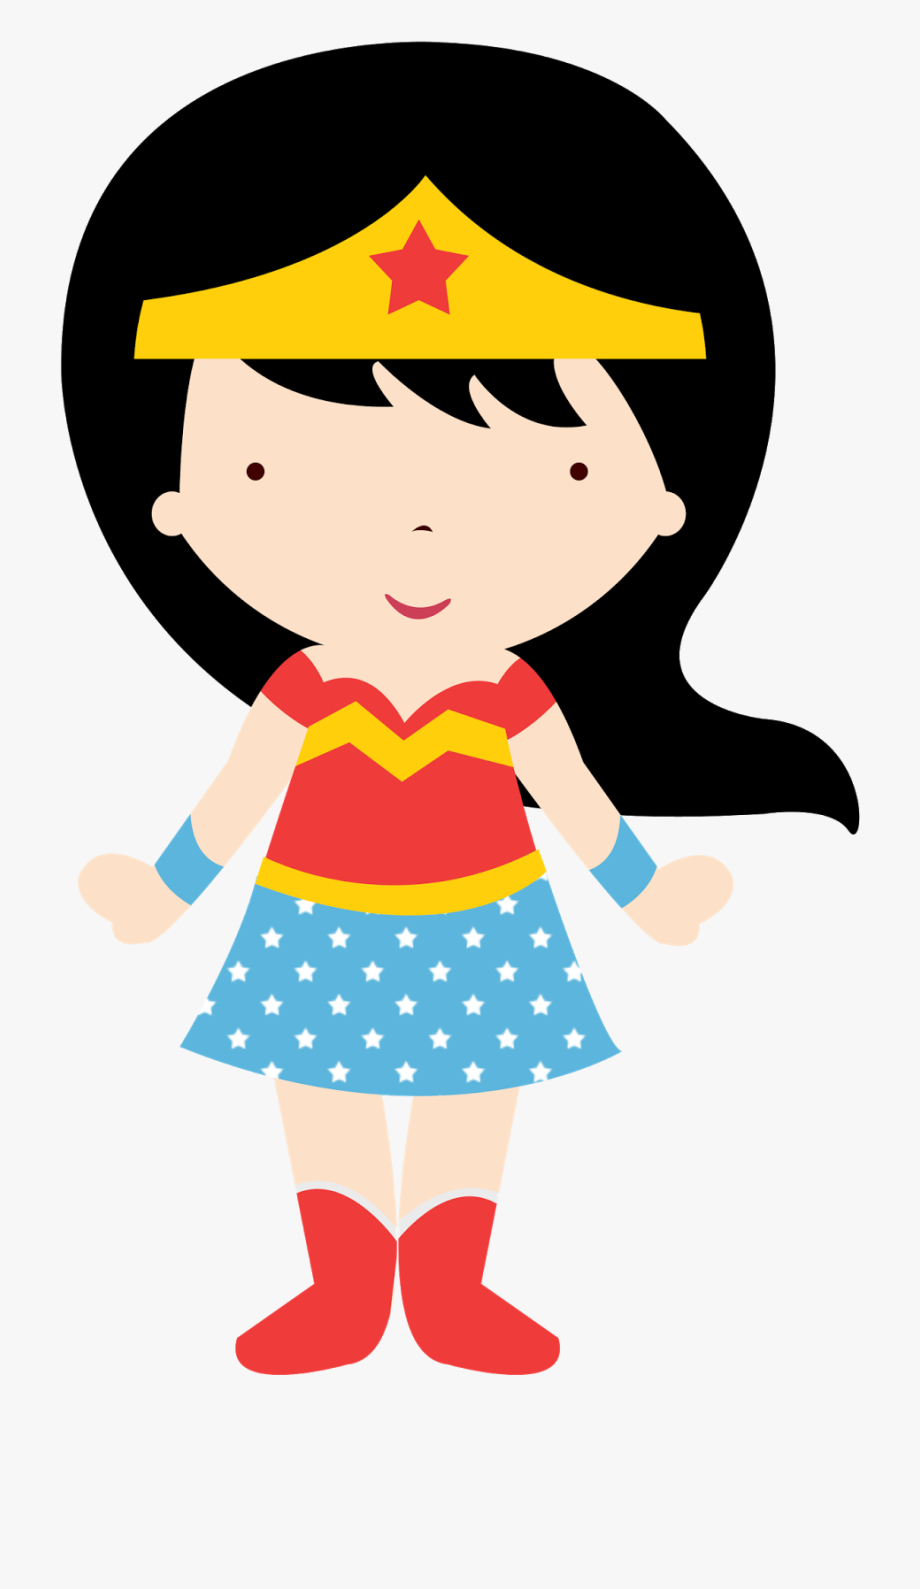 Warrior clipart baby. Wonder woman png 